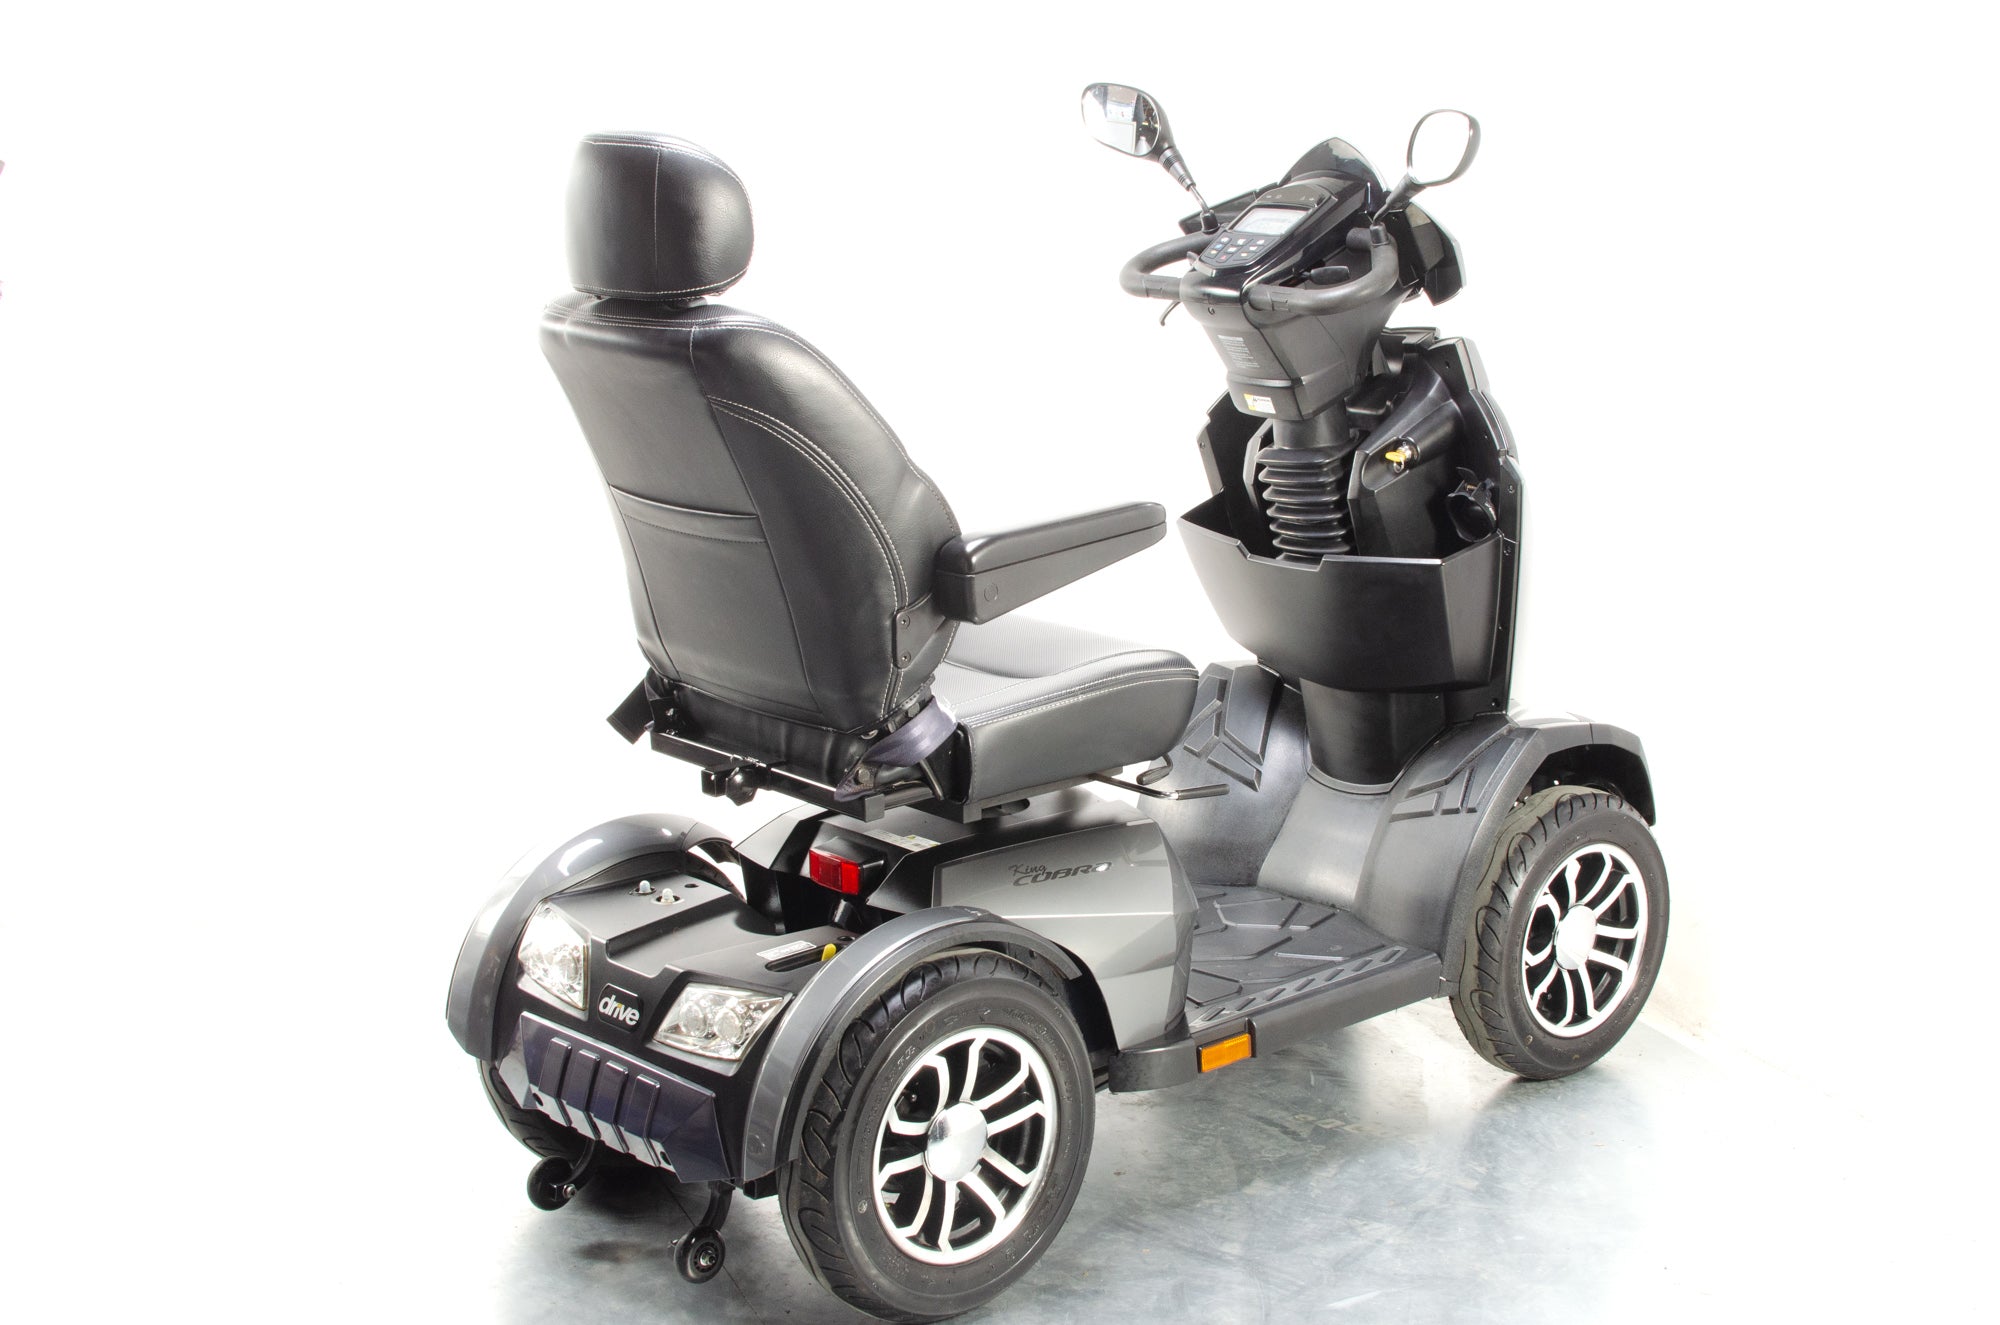 King Cobra Used Electric Mobility Scooter 8mph Drive Large All-Terrain Road Max User Weight 32st (203kg)